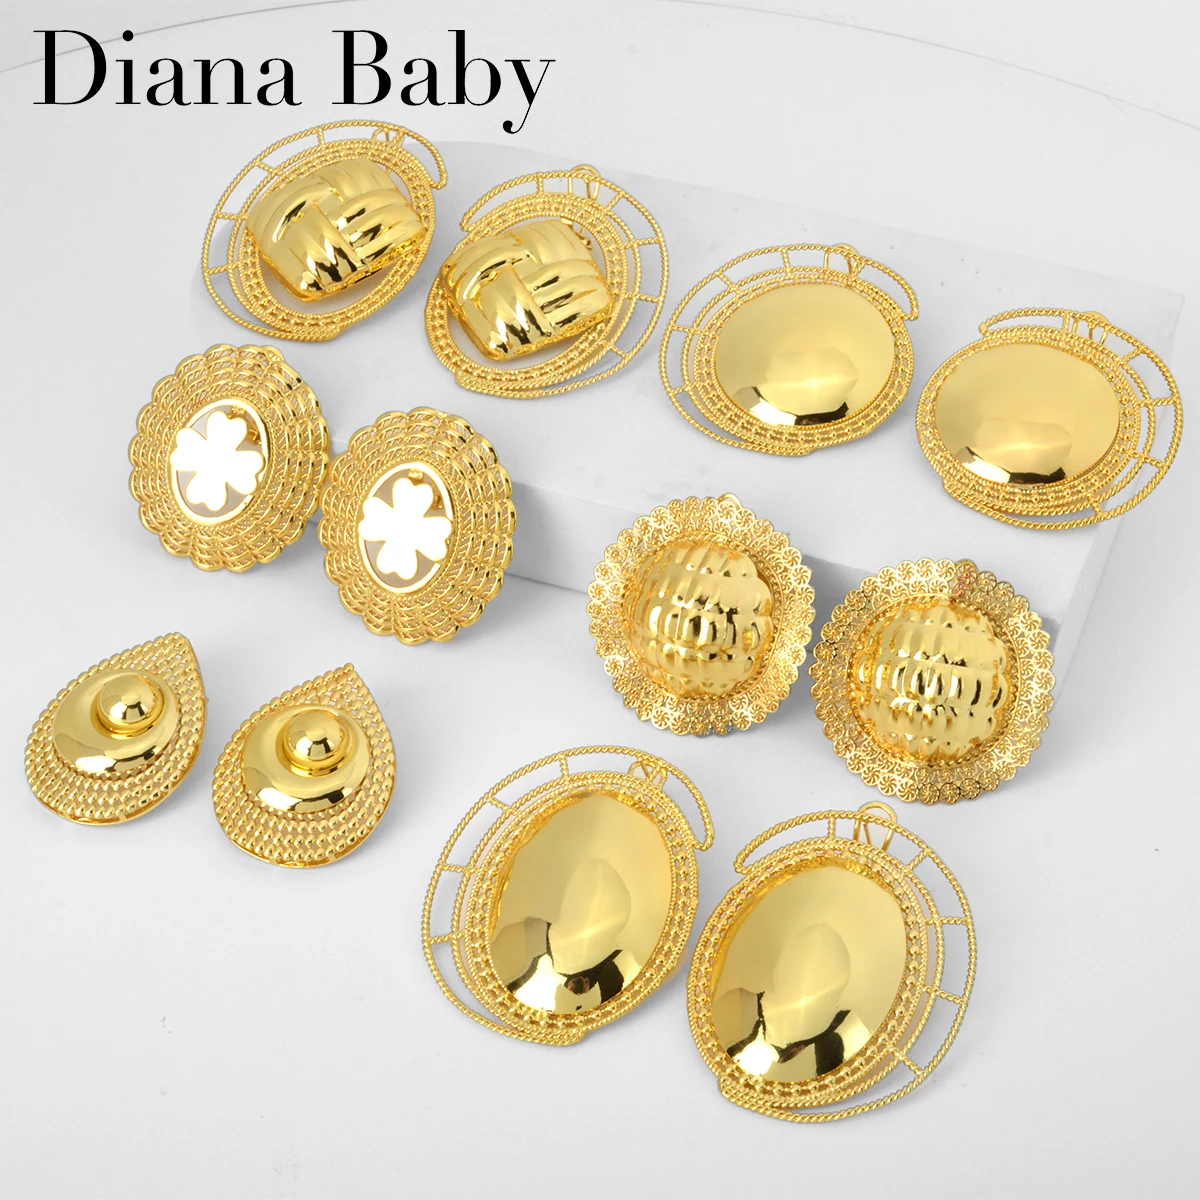 

Diana Baby Jewelry Dubai 18K Gold Plated Africa Earrings Nigeria Big Luxury Classic New Jewellery for Lady Party Wedding Gift